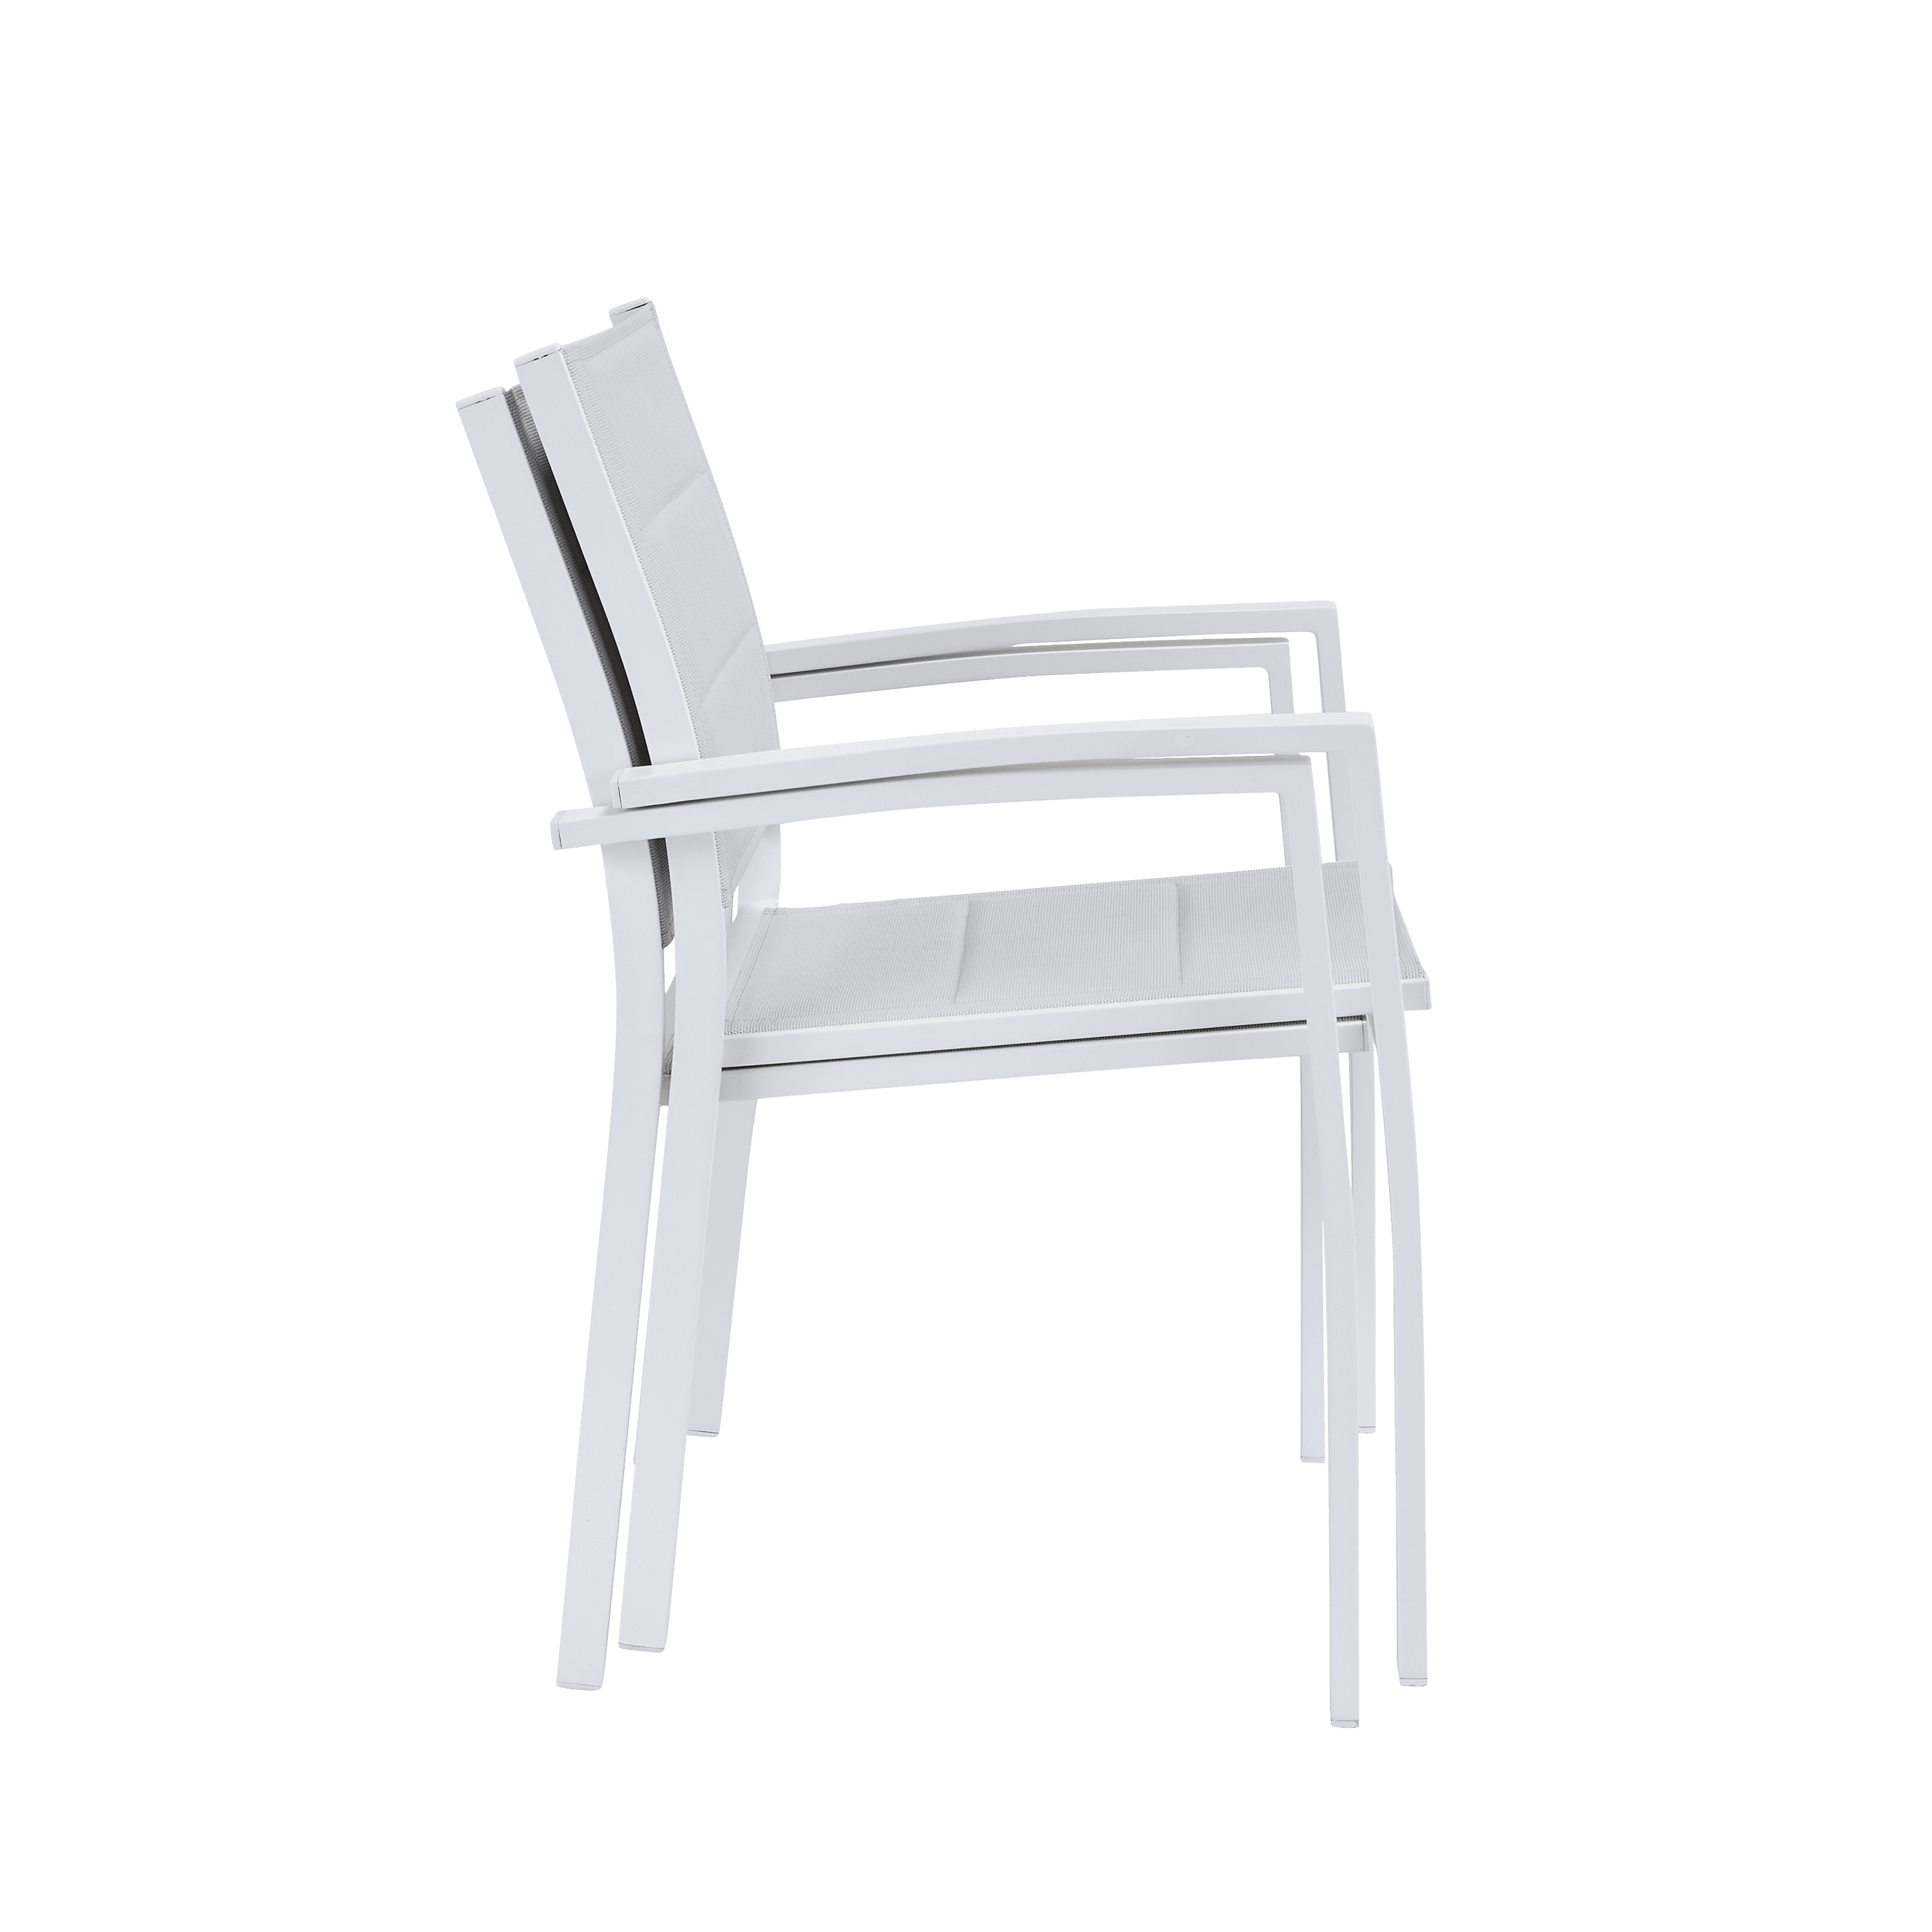 ORION BETA II NATERIAL Chair with armrests aluminum and textilene, padded, white